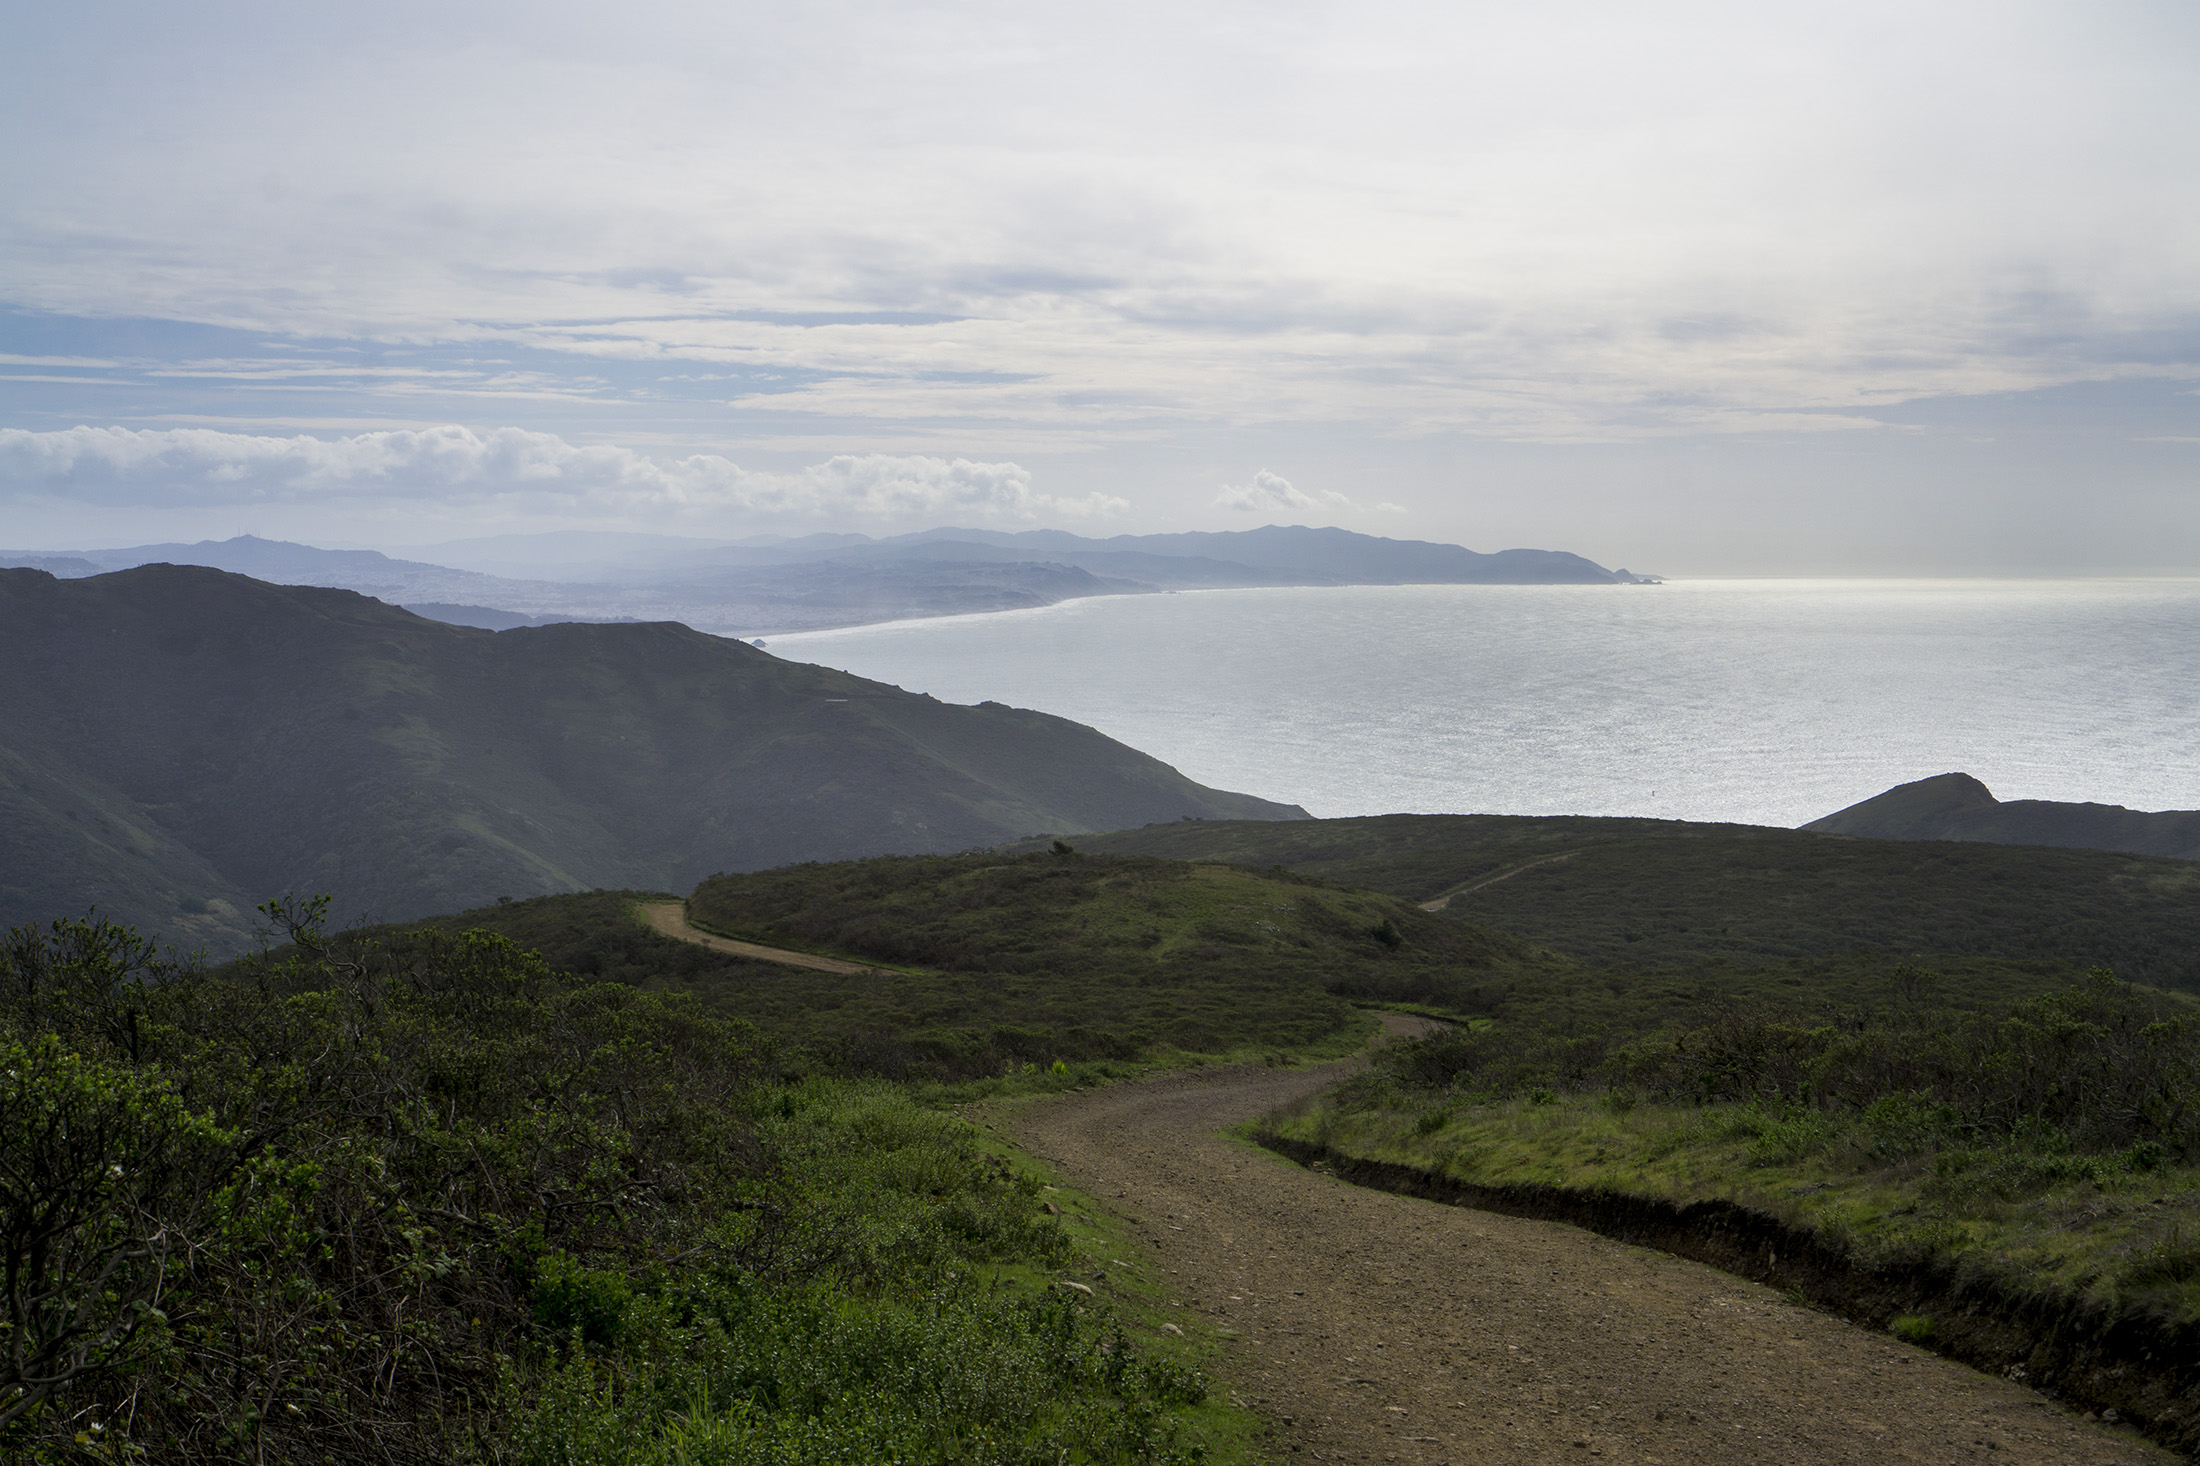 Pacific Ocean along the Tennessee Valley Trail, Marin Headlands, Golden Gate National Recreation Area / Darker than Green